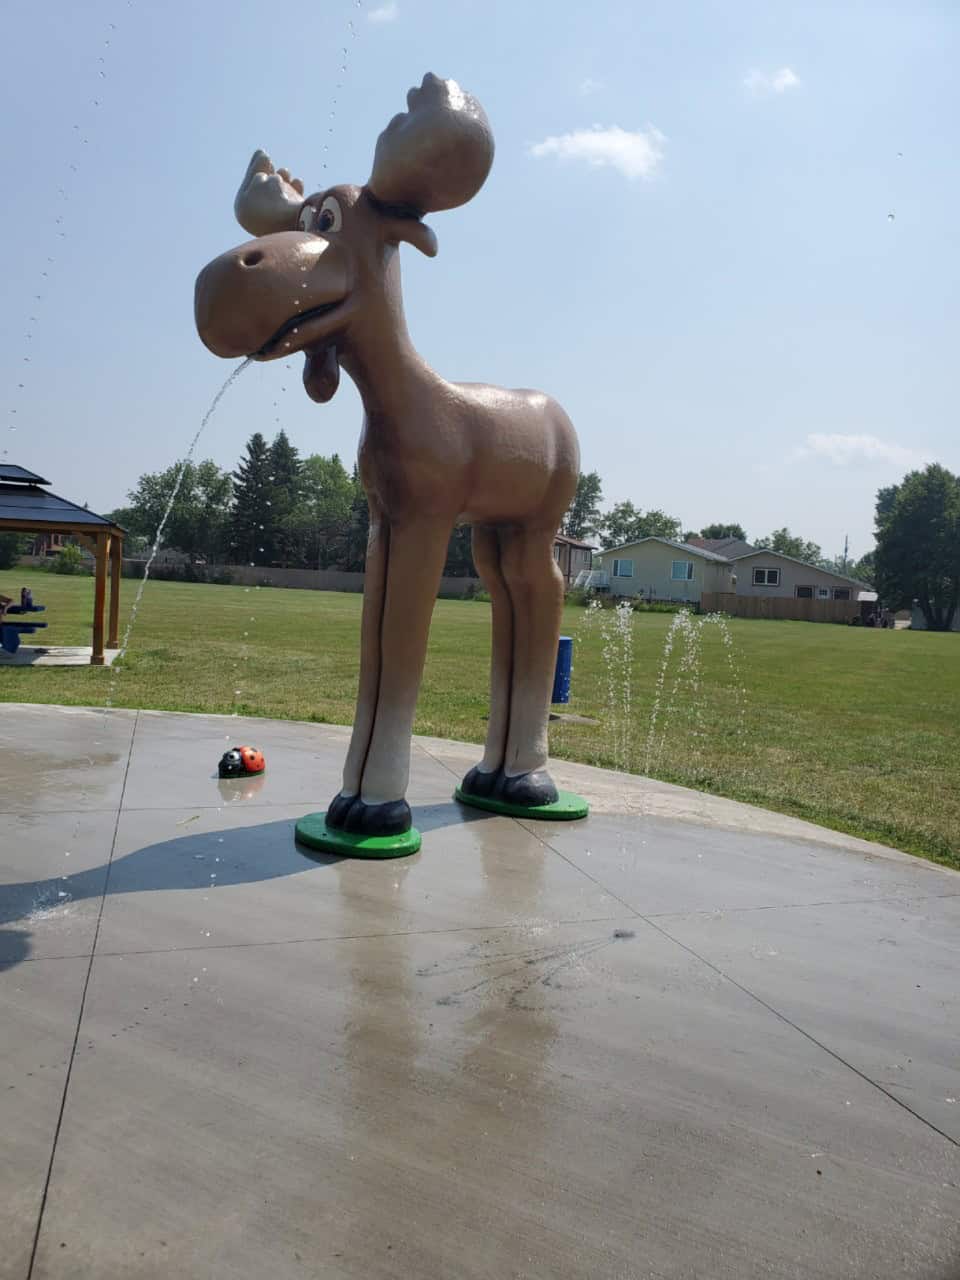 Mini Mac the Moose Spray Park  - What a perfect feature for a Moose Jaw kids park! A large, yet mini compared to Mac who welcomes visitors to Moose Jaw along Hwy 1. Mac is the world's largest Moose! So this is a cute mini Mac